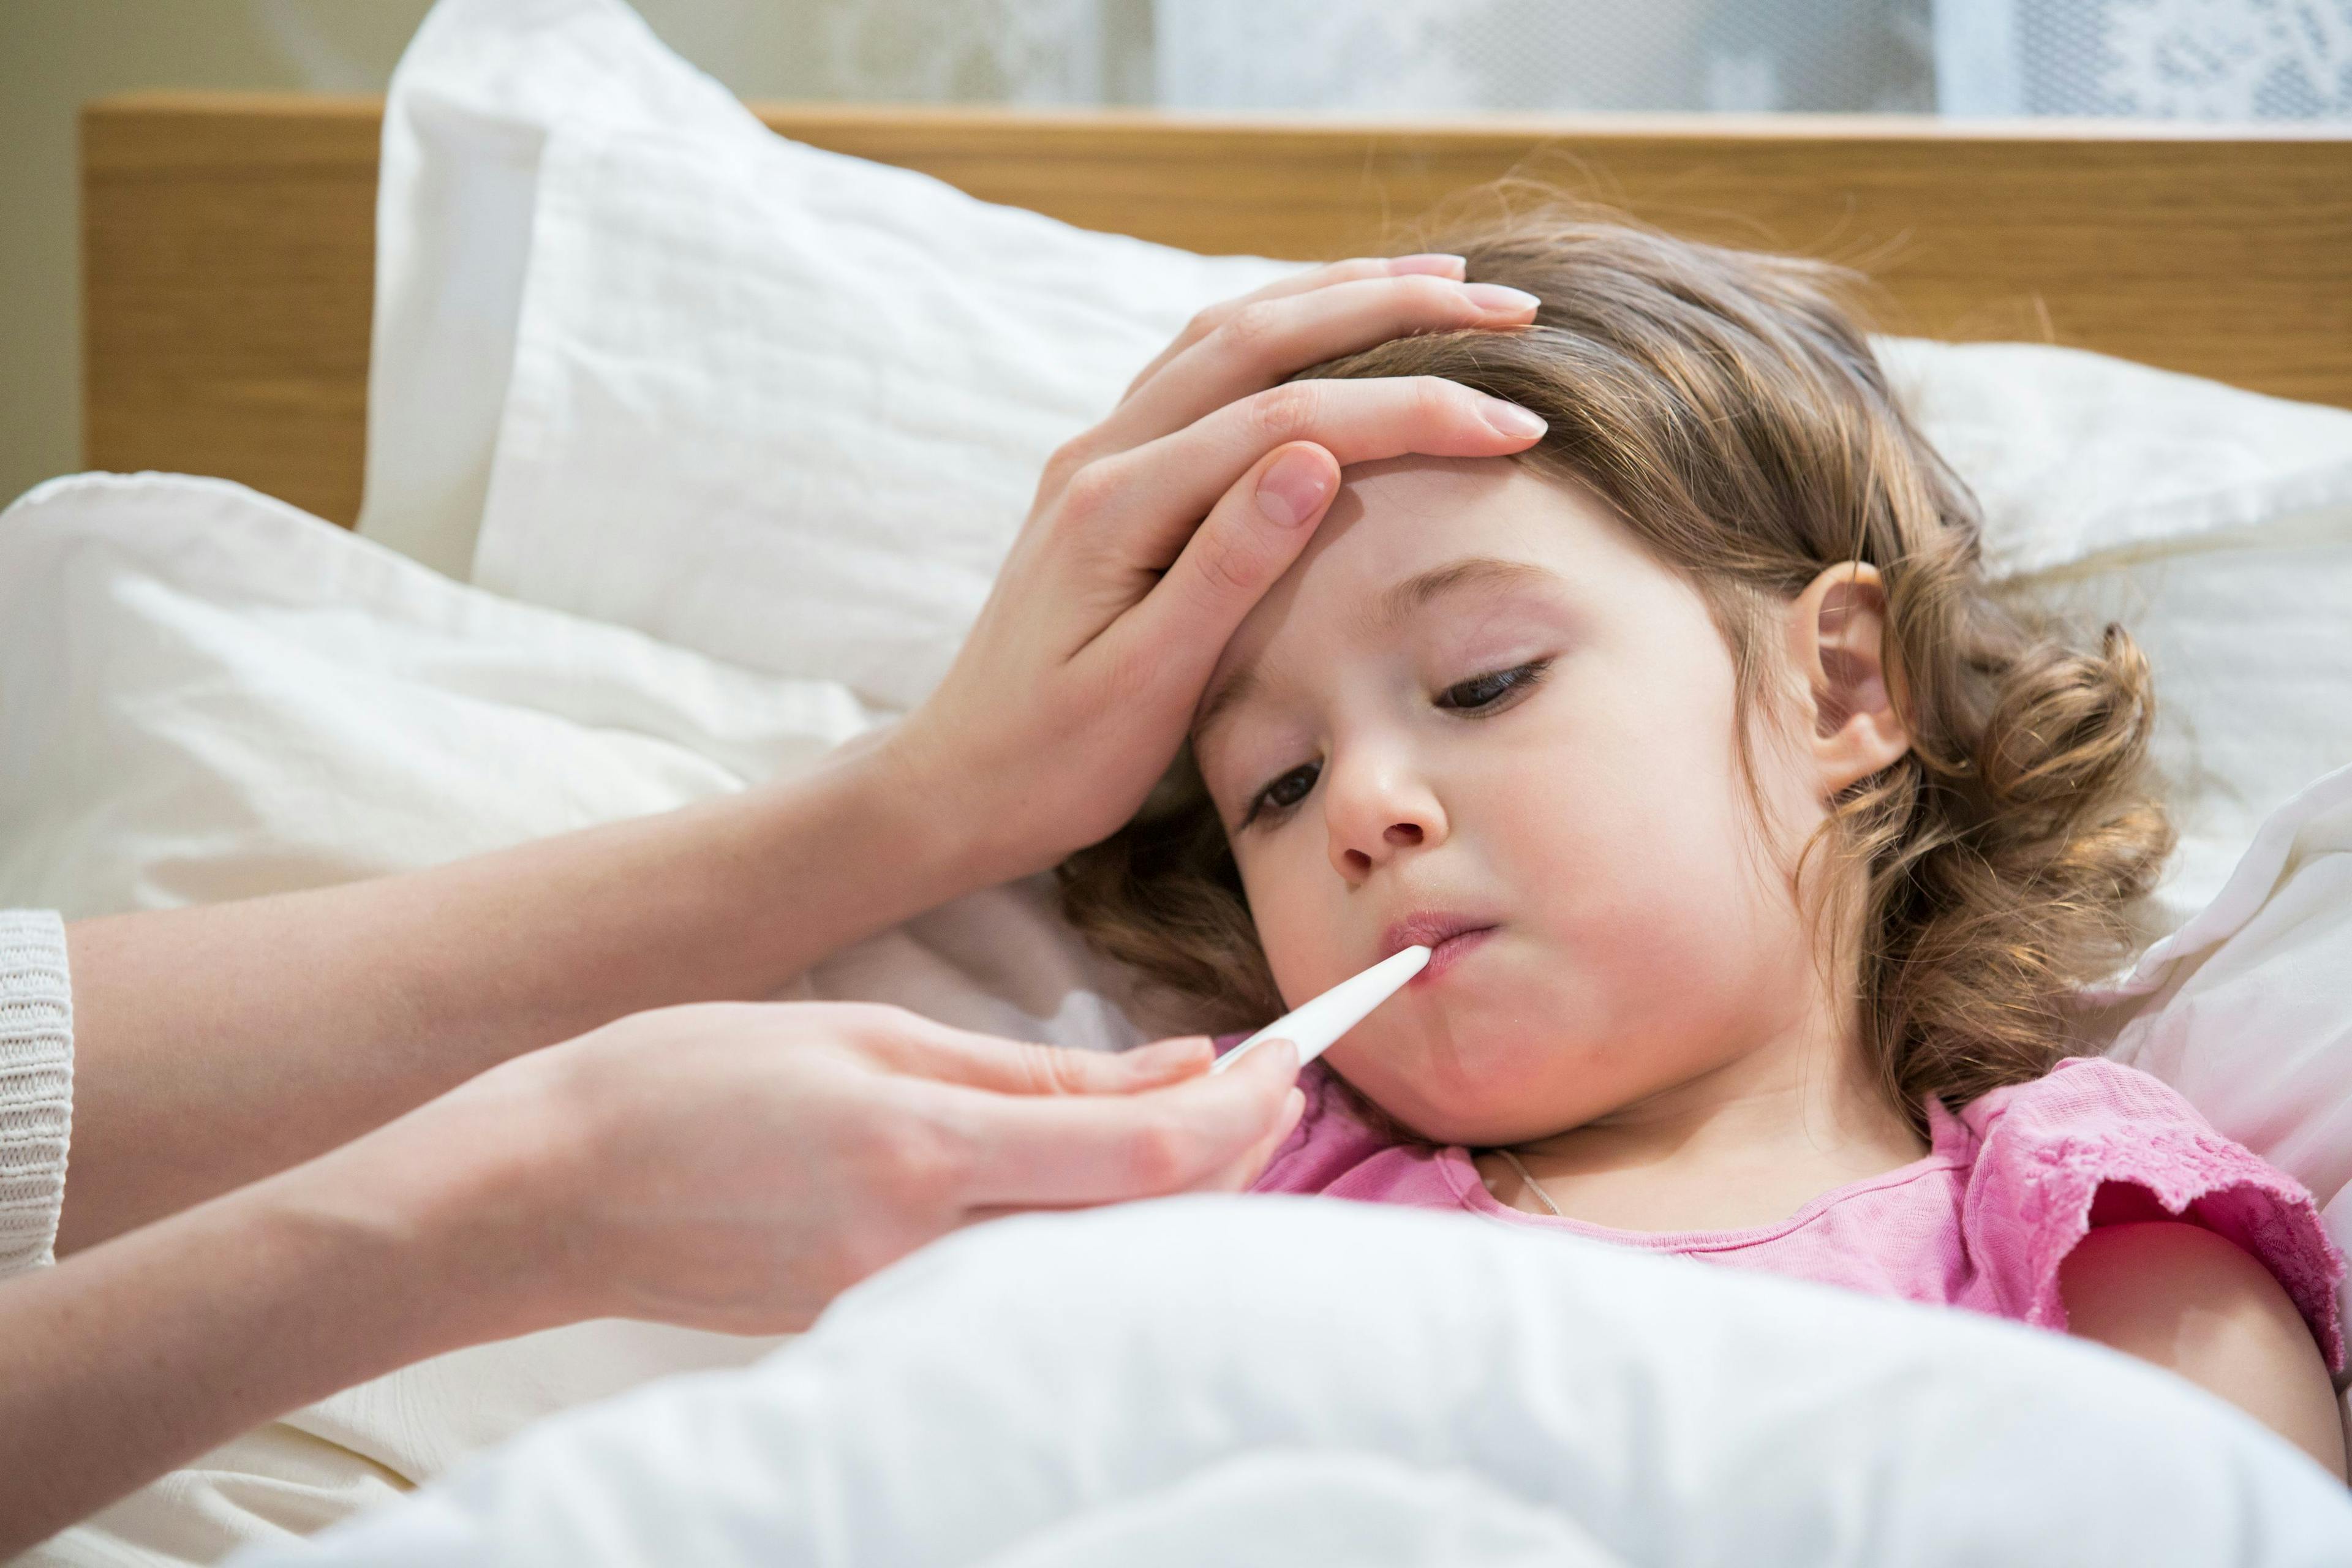 Long COVID leads to lingering effects in children